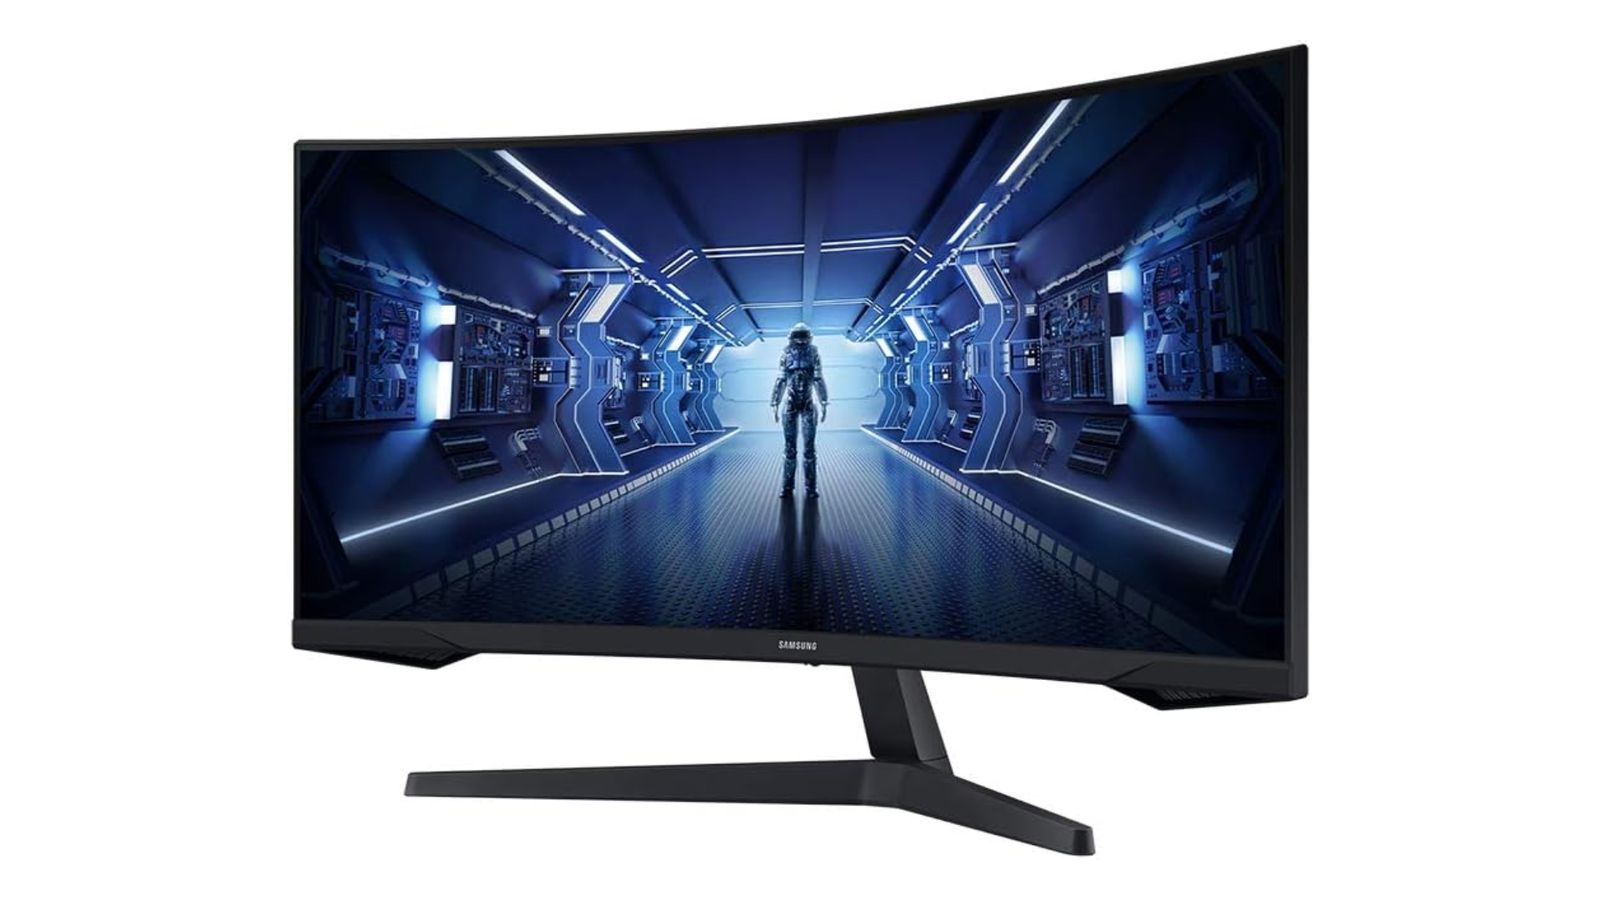 Samsung Odyssey G5 product image of a curved, black monitor with a person in a space suit walking down a Sci-Fi walkway bathed in blue.